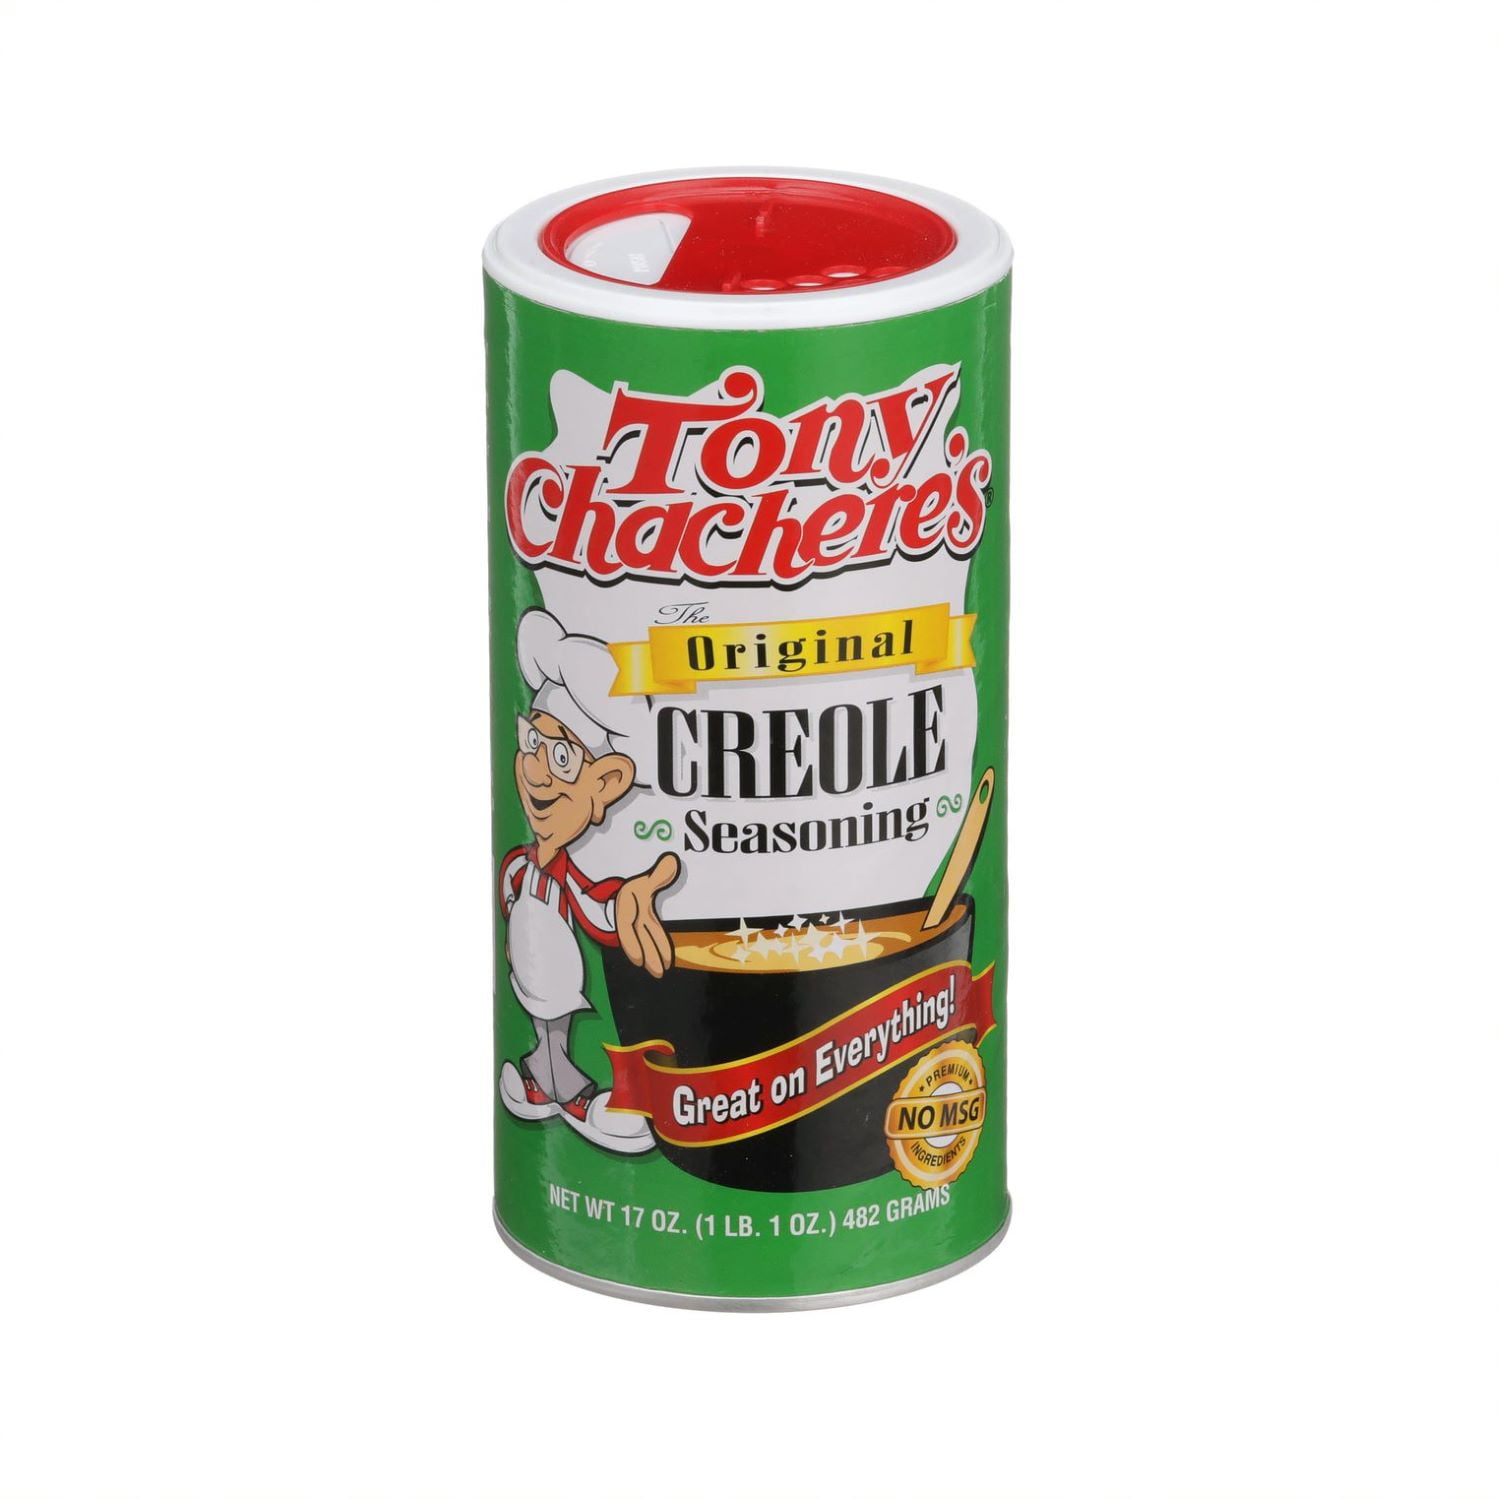  Tony Chacheres Seasoning Creole, 17 oz Canister Original 2  Pack : Grocery & Gourmet Food